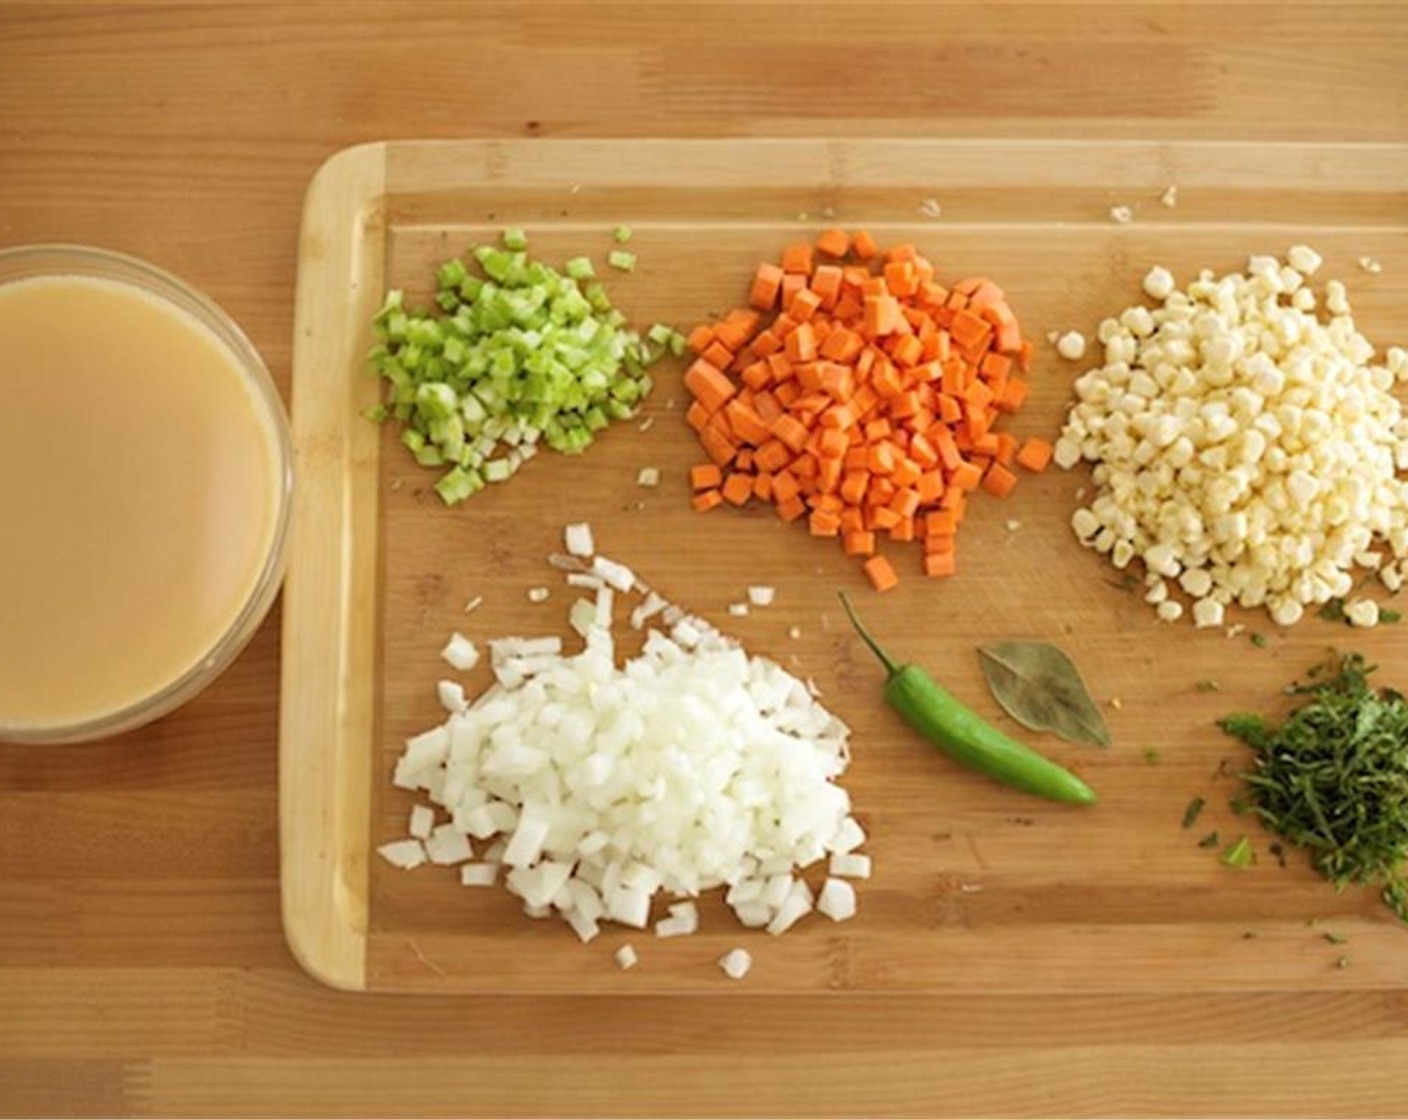 step 2 Peel and cut the Onion (1) into quarter inch pieces and set aside. Peel Carrots (2). Dice the Celery (1 stalk) and carrot into a quarter inch dice, and set aside together on a plate.